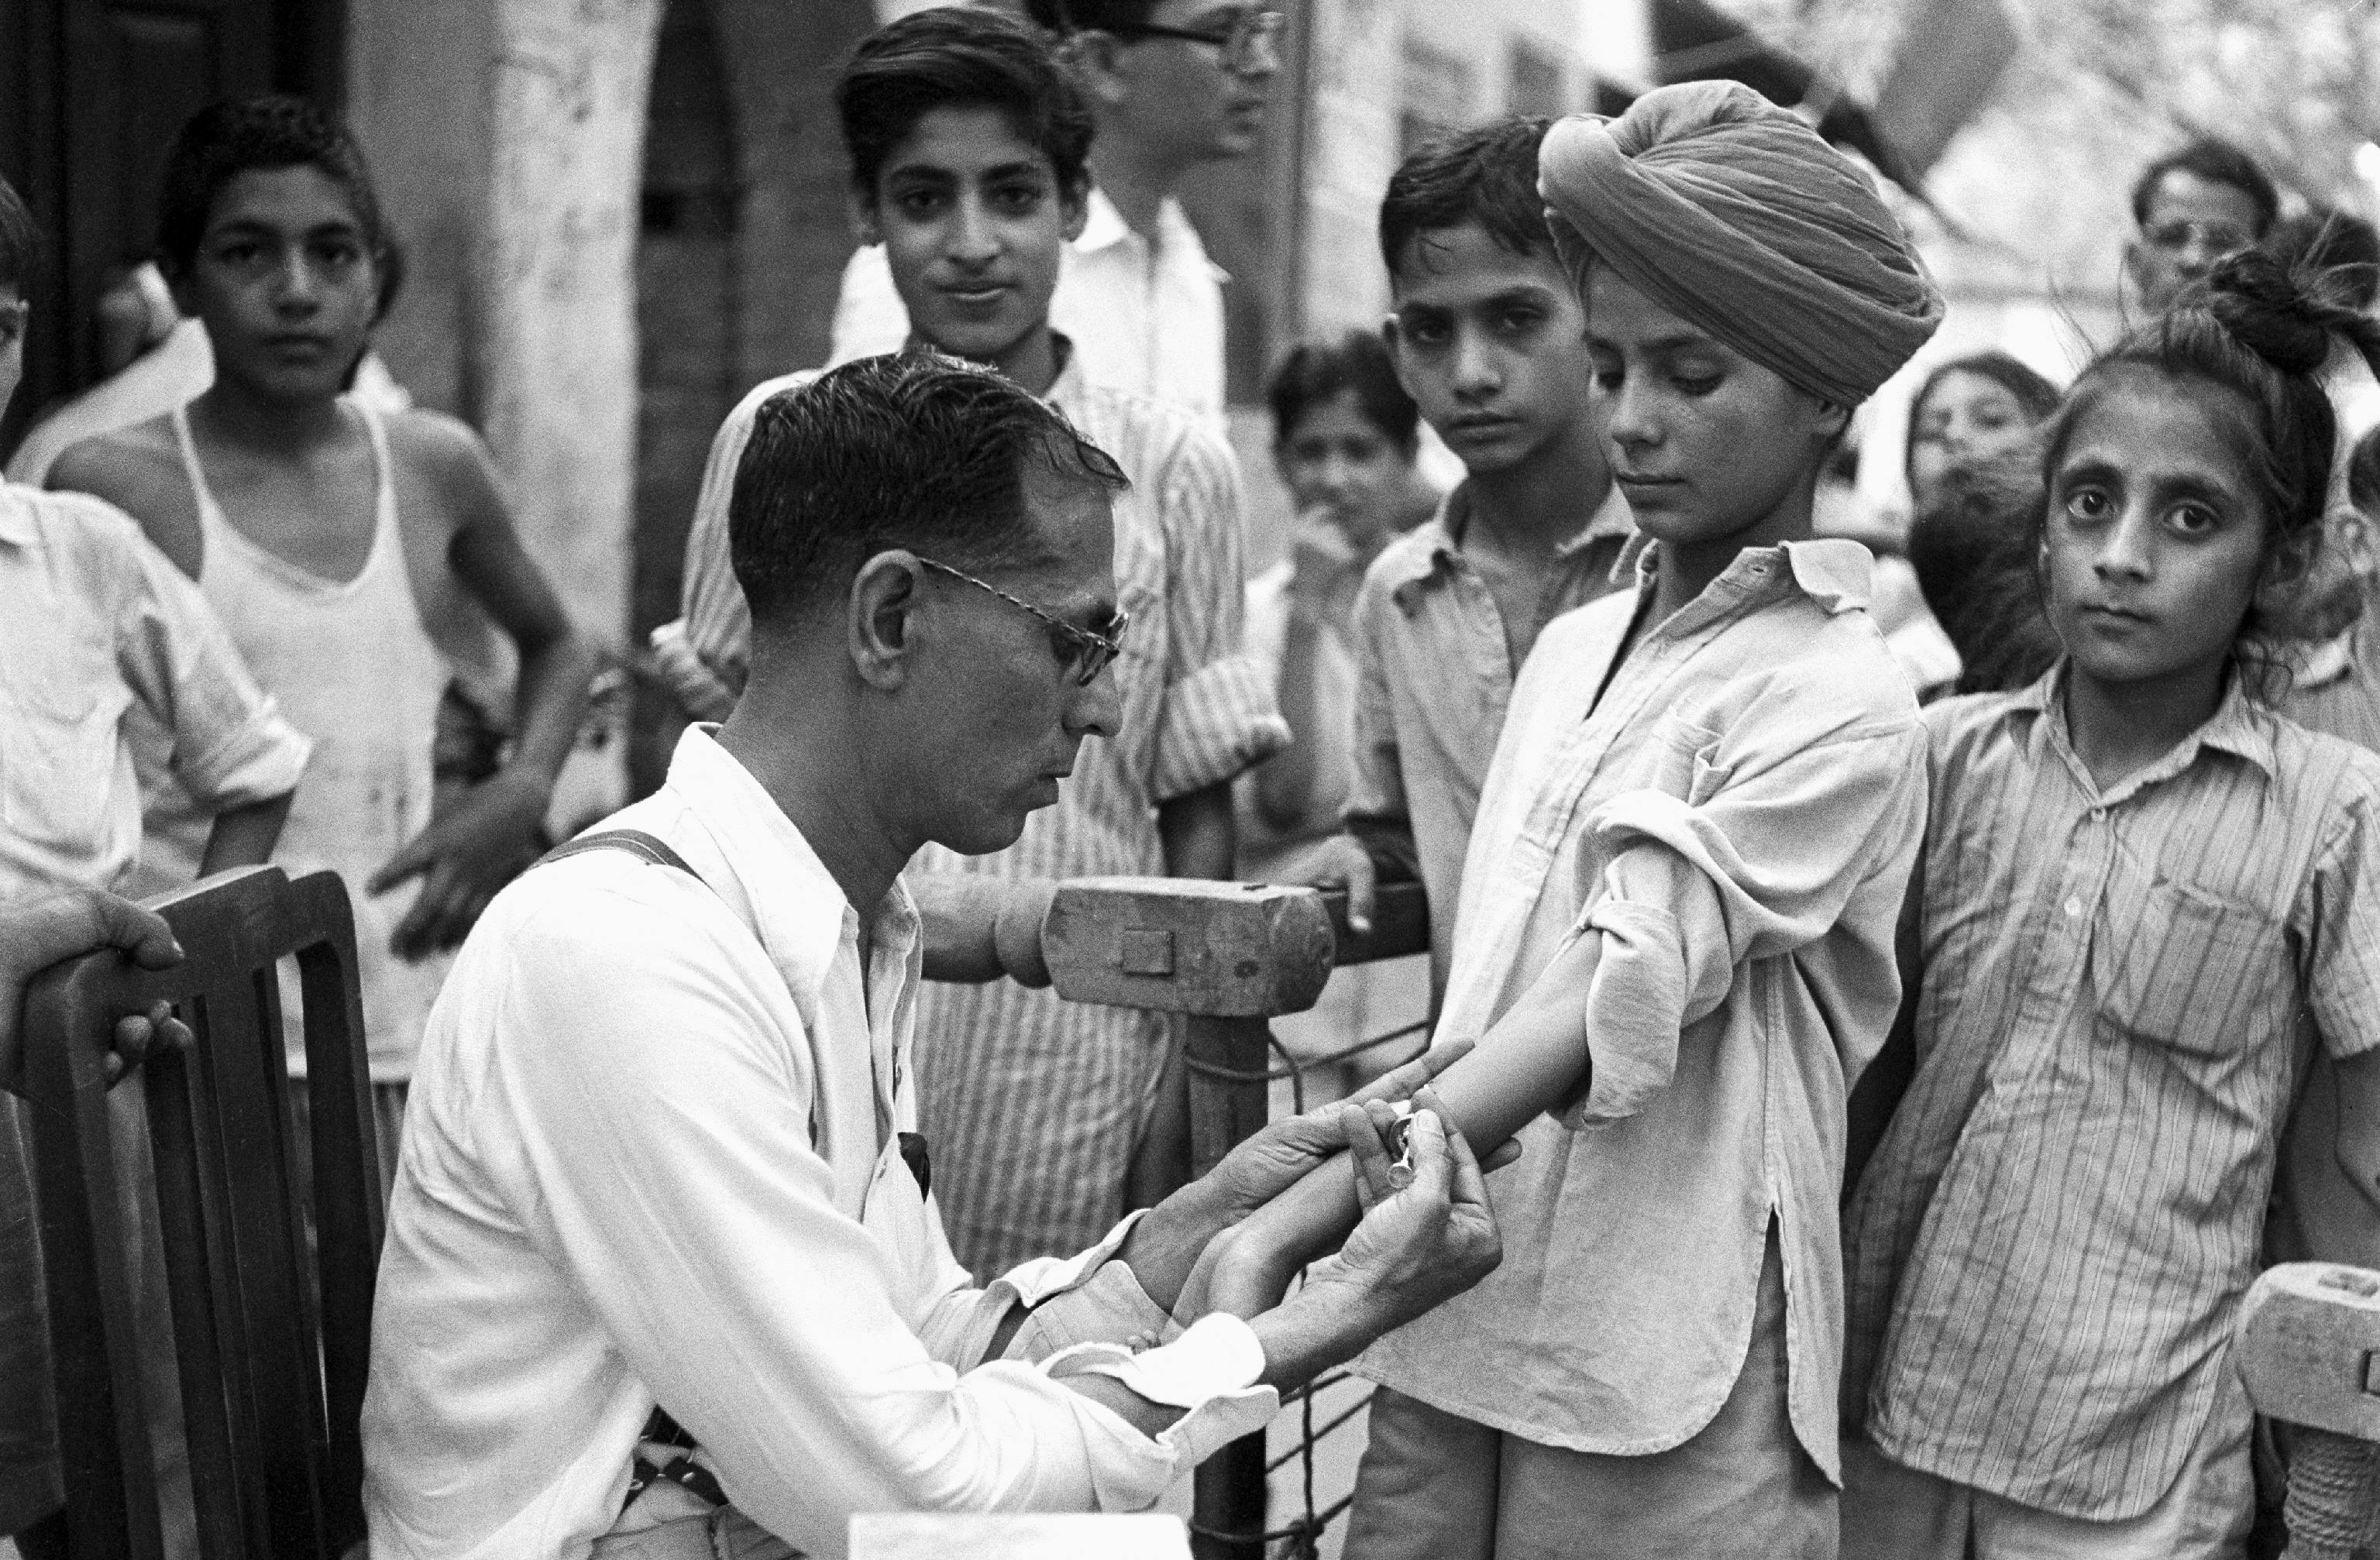 Circa 1956 in India, a Norwegian doctor from the World Health Organization (WHO) tests a boy for tuberculosis at an outdoor street site in New Delhi, the capital. If the test is negative, the boy will be vaccinated to ensure that he does not contract the disease. 